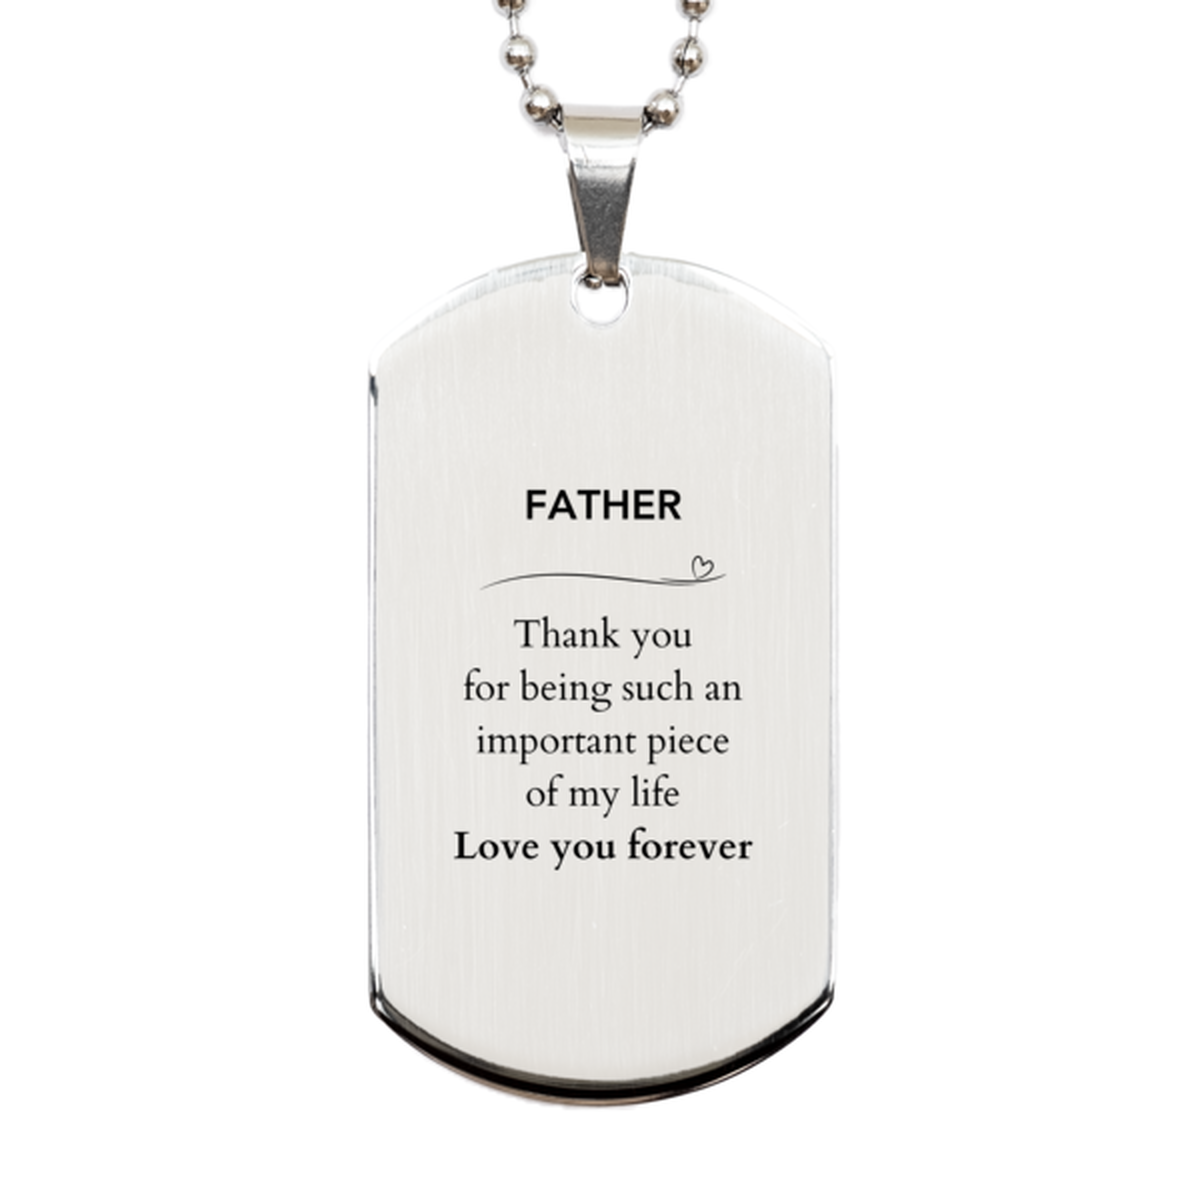 Appropriate Father Silver Dog Tag Epic Birthday Gifts for Father Thank you for being such an important piece of my life Father Christmas Mothers Fathers Day